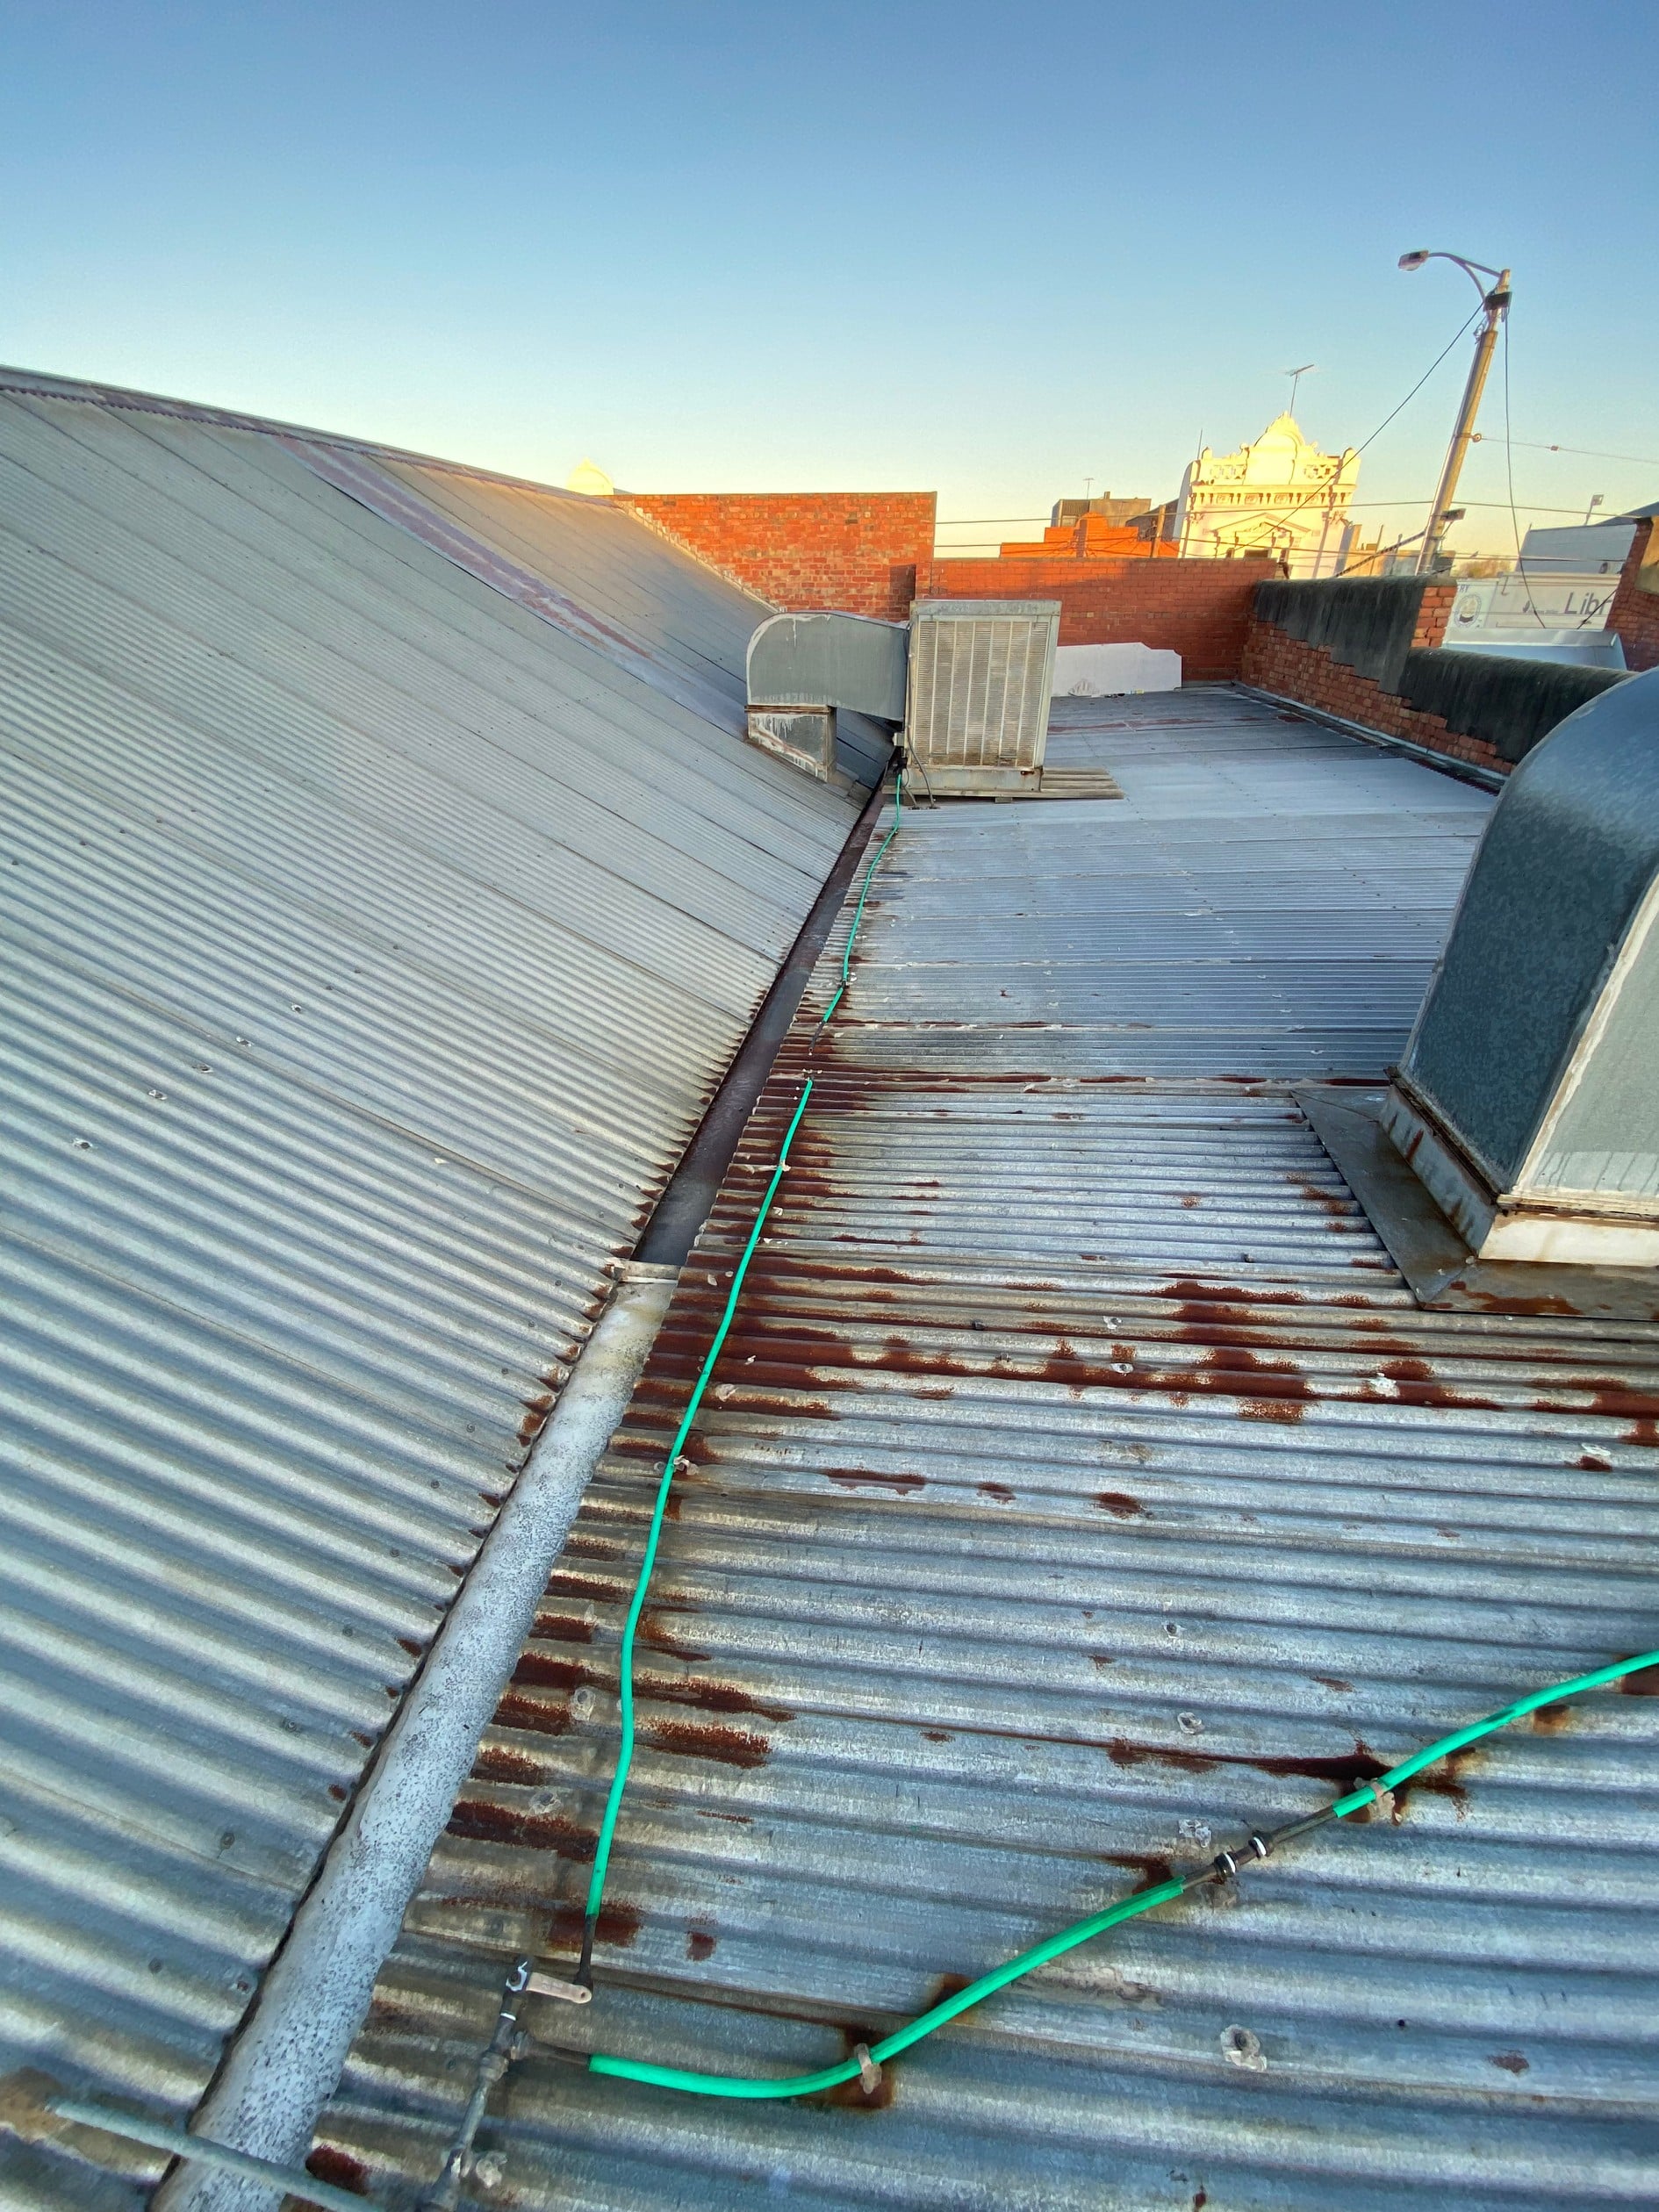 Blue and silver metallic corrugated rooftop with brown corrosion stains. the horizon has orange brick buildings and a blue skyline.